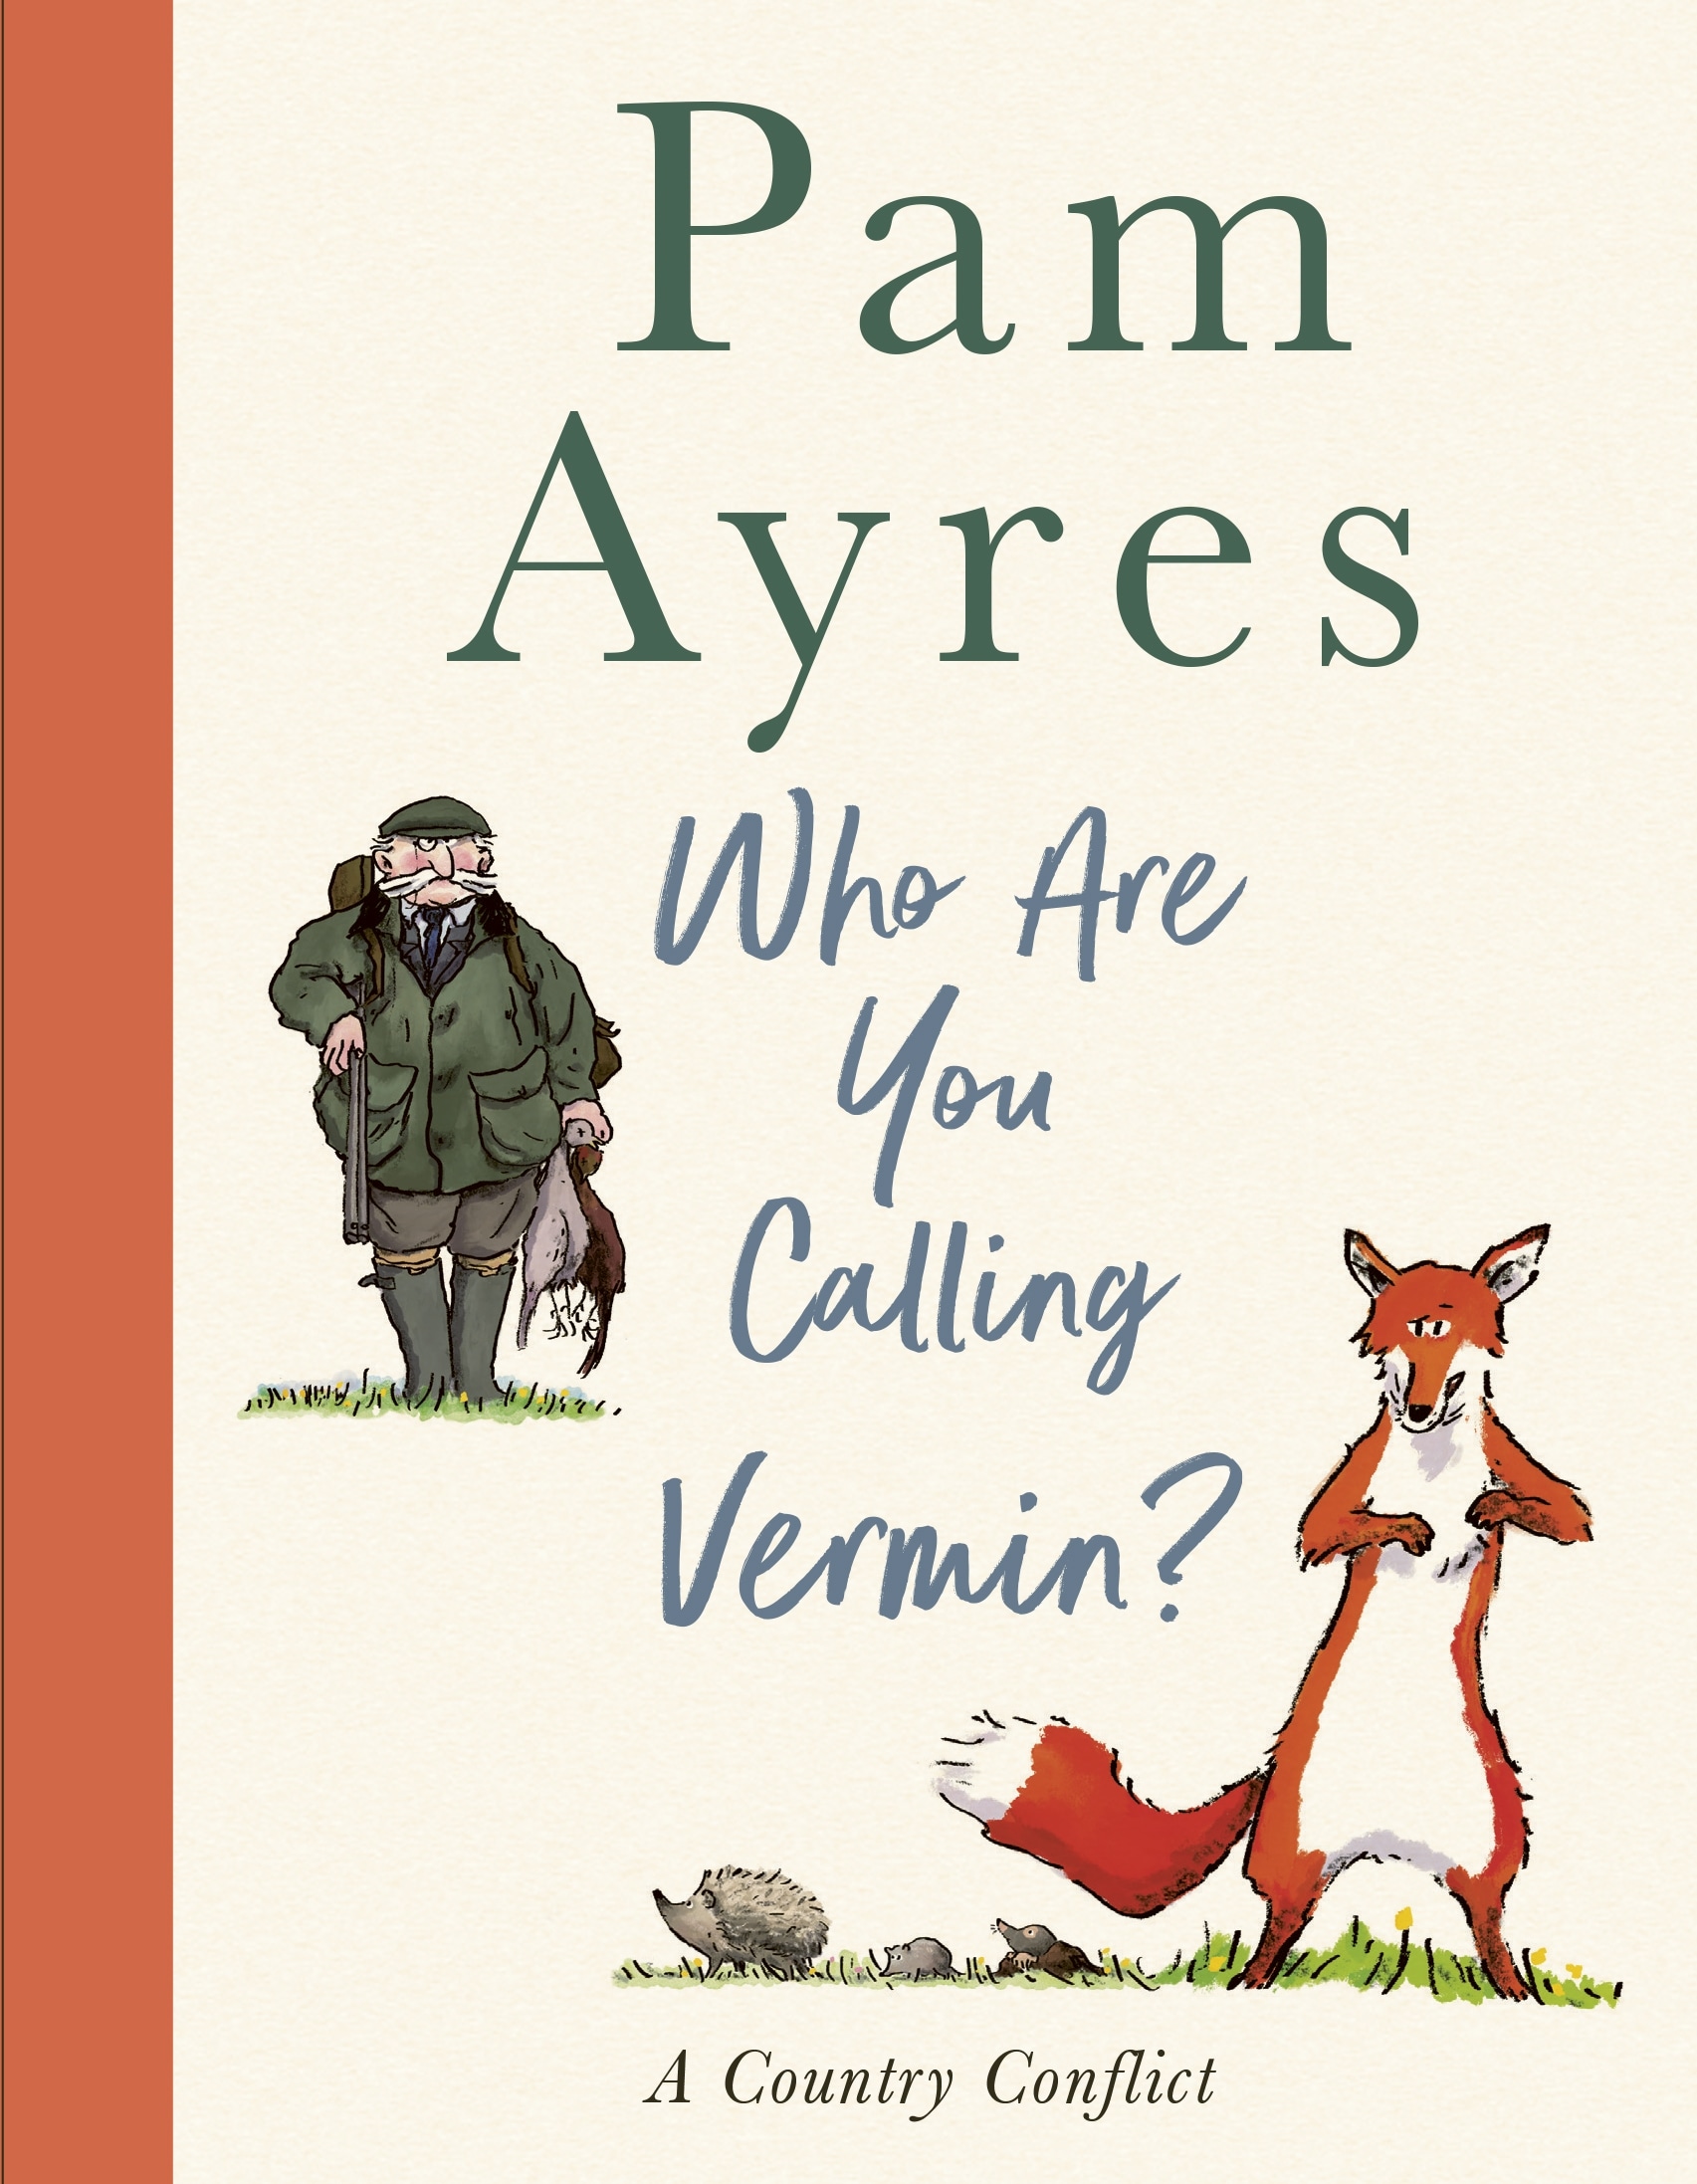 Book “Who Are You Calling Vermin?” by Pam Ayres — September 8, 2022